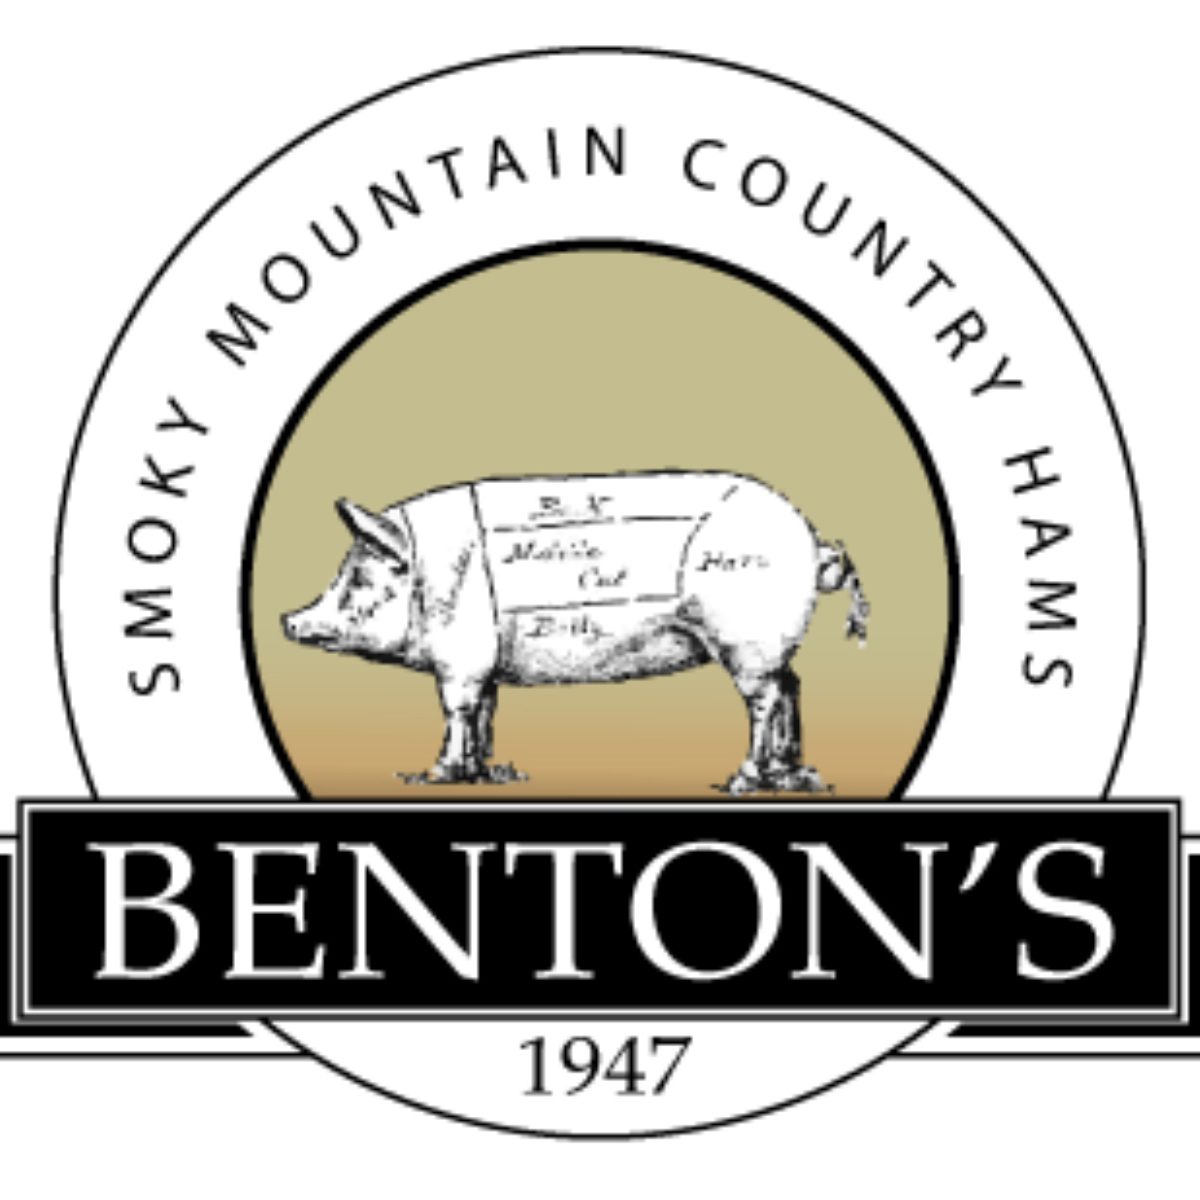 <p><strong><a class="SWhtmlLink" href="http://bentonscountryhams2.com" rel="noopener">Benton's</a>, Madisonville</strong></p> <p>Chefs all around the country are singing the praises of Benton's Smoky Mountain Country Hams. The company follows the same family recipes established in 1947, and they're known for making some of the smokiest bacon and savory hams in the world.</p>